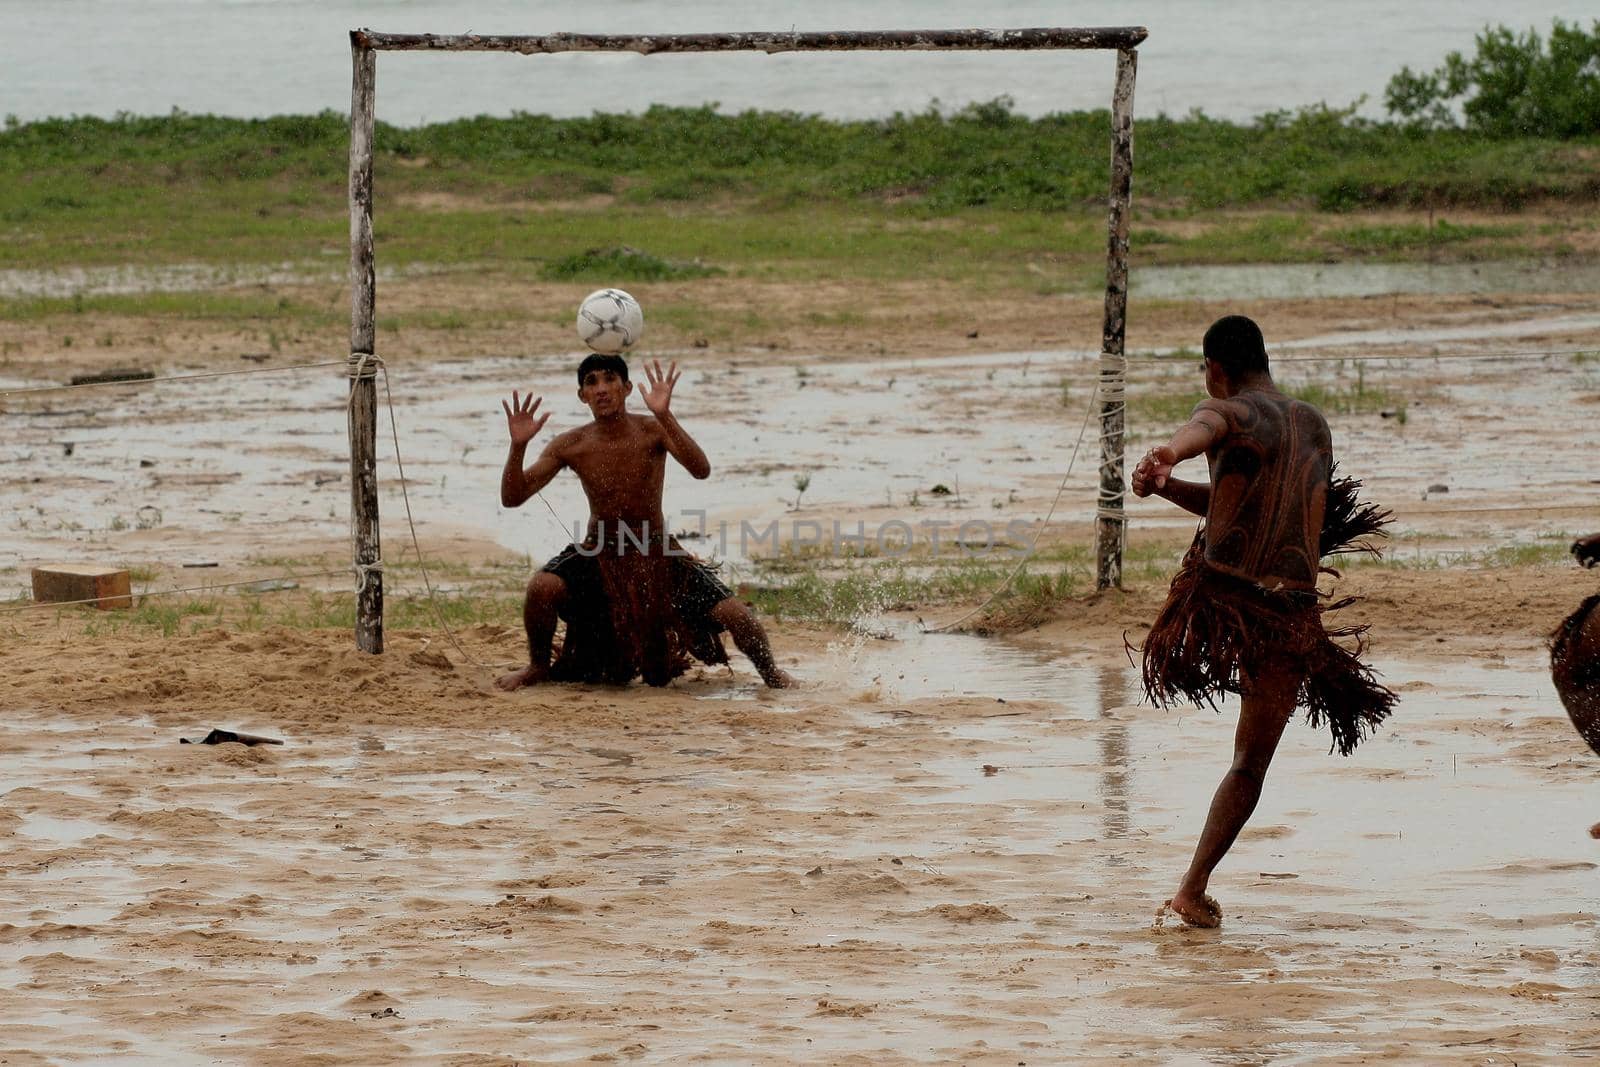 santa cruz cabralia, bahia / brazil - april 20, 2009: indians of the Pataxo ethnicity are seen during a soccer match at indigenous games in the Coroa Vermelha village in the city of Santa Cruz Cabralia.